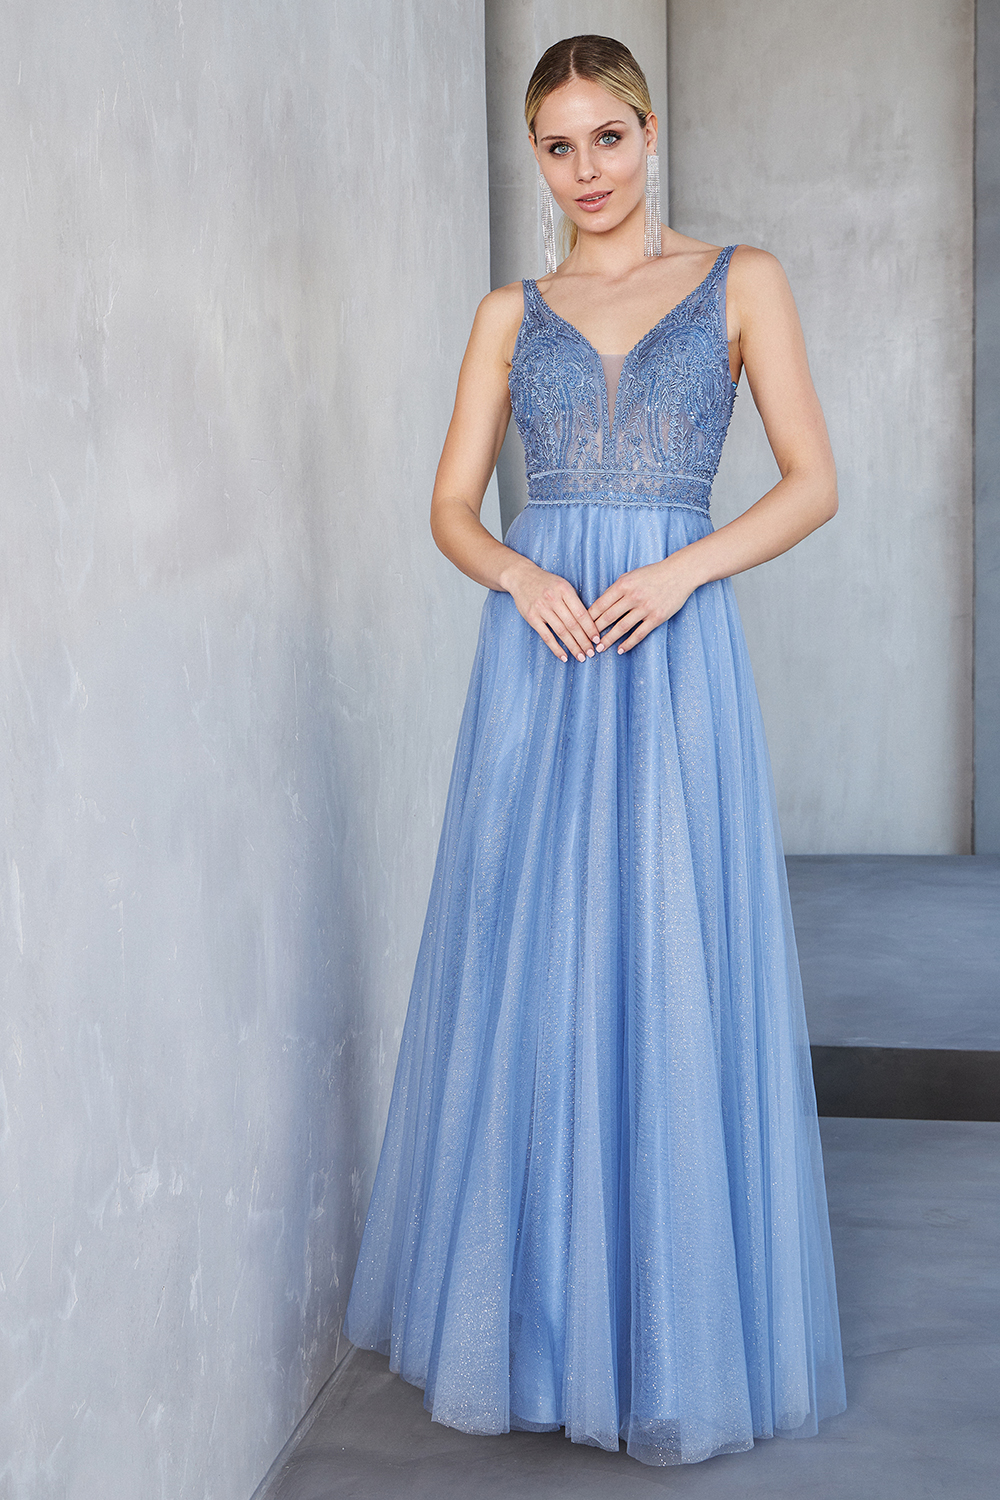 Evening Dresses / Long evening dress with shining tulle fabric and fully beaded top